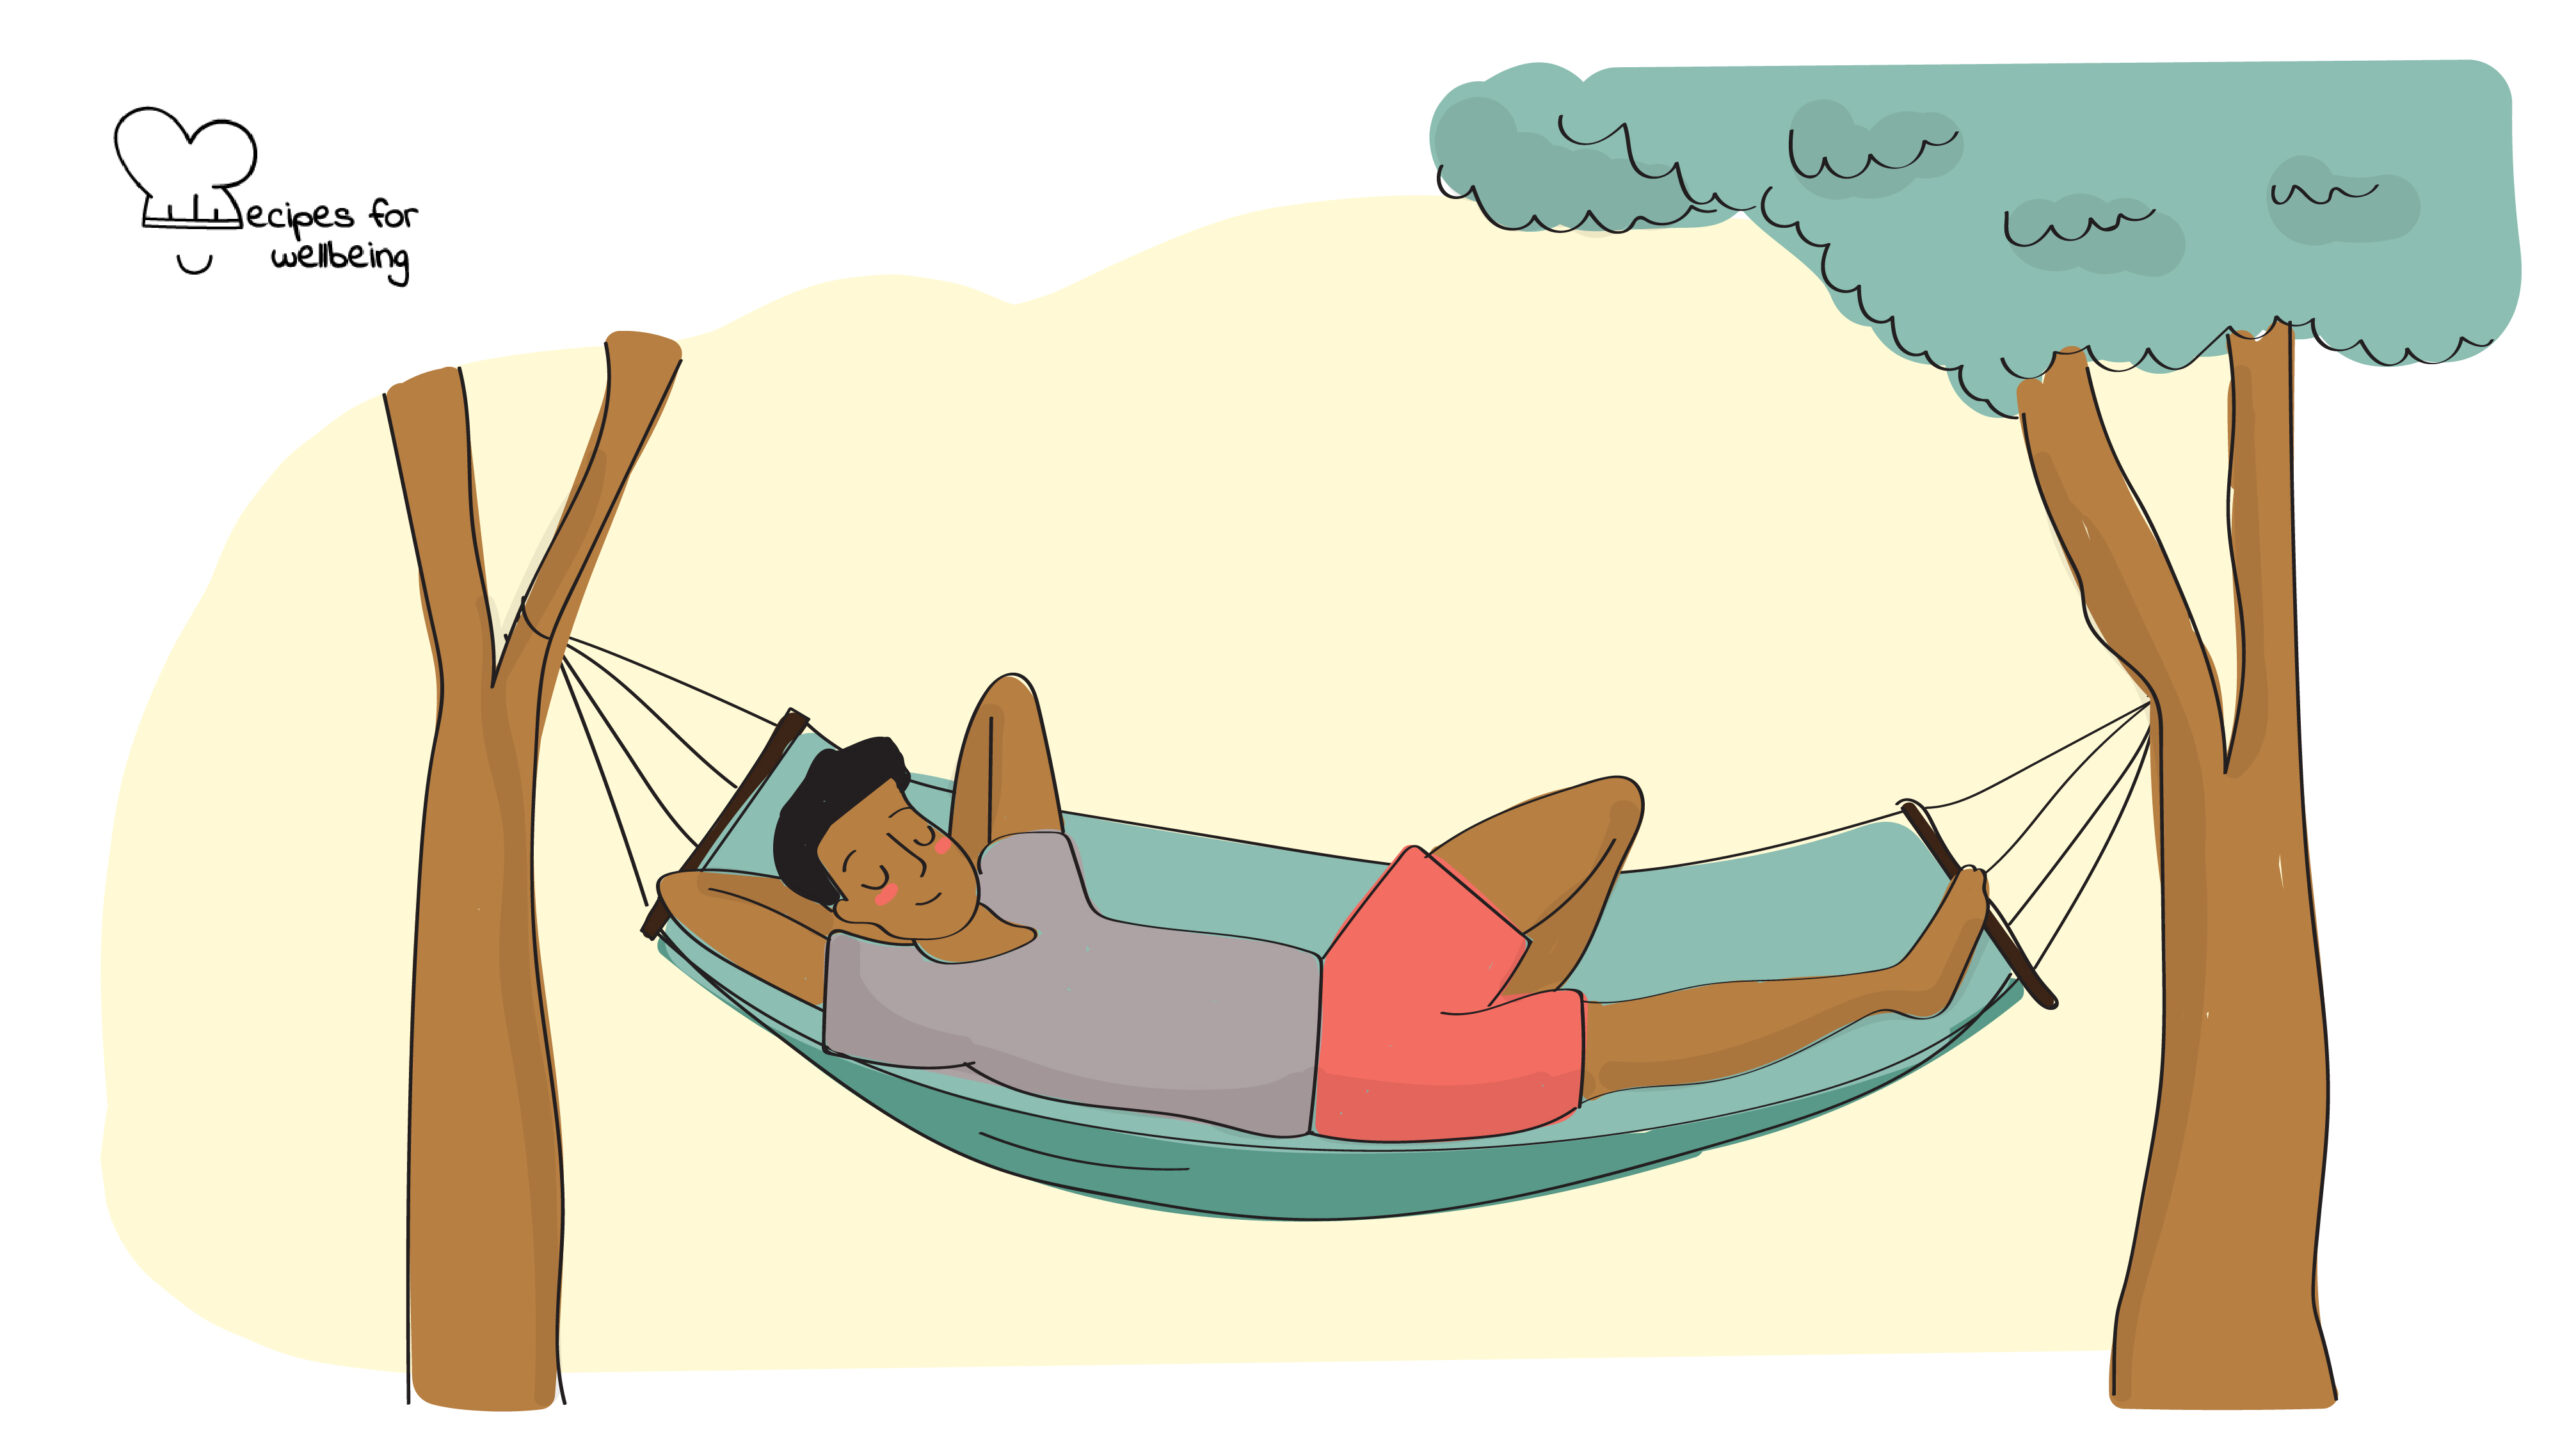 Illustration of a person resting on a hammock. © Recipes for Wellbeing